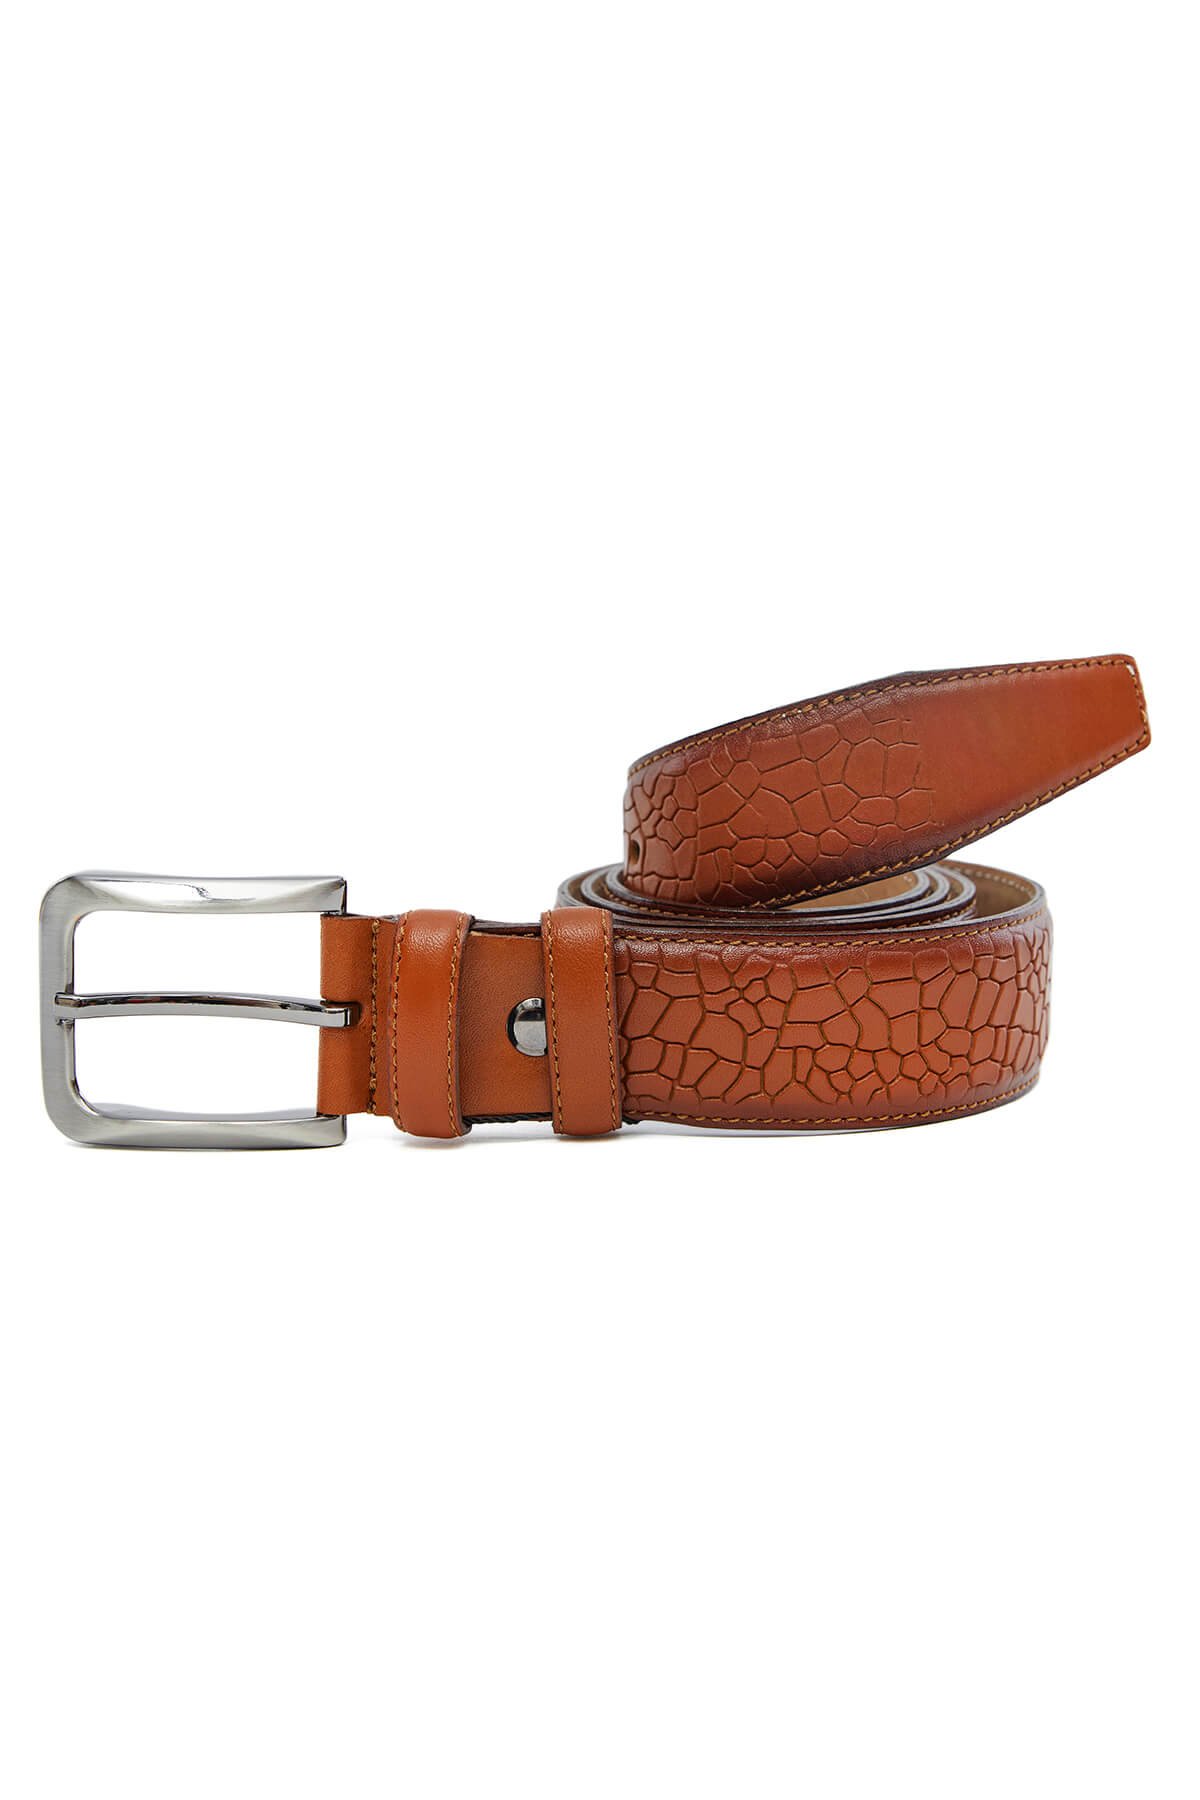 Patterned Genuine Classic Leather Belt Tan